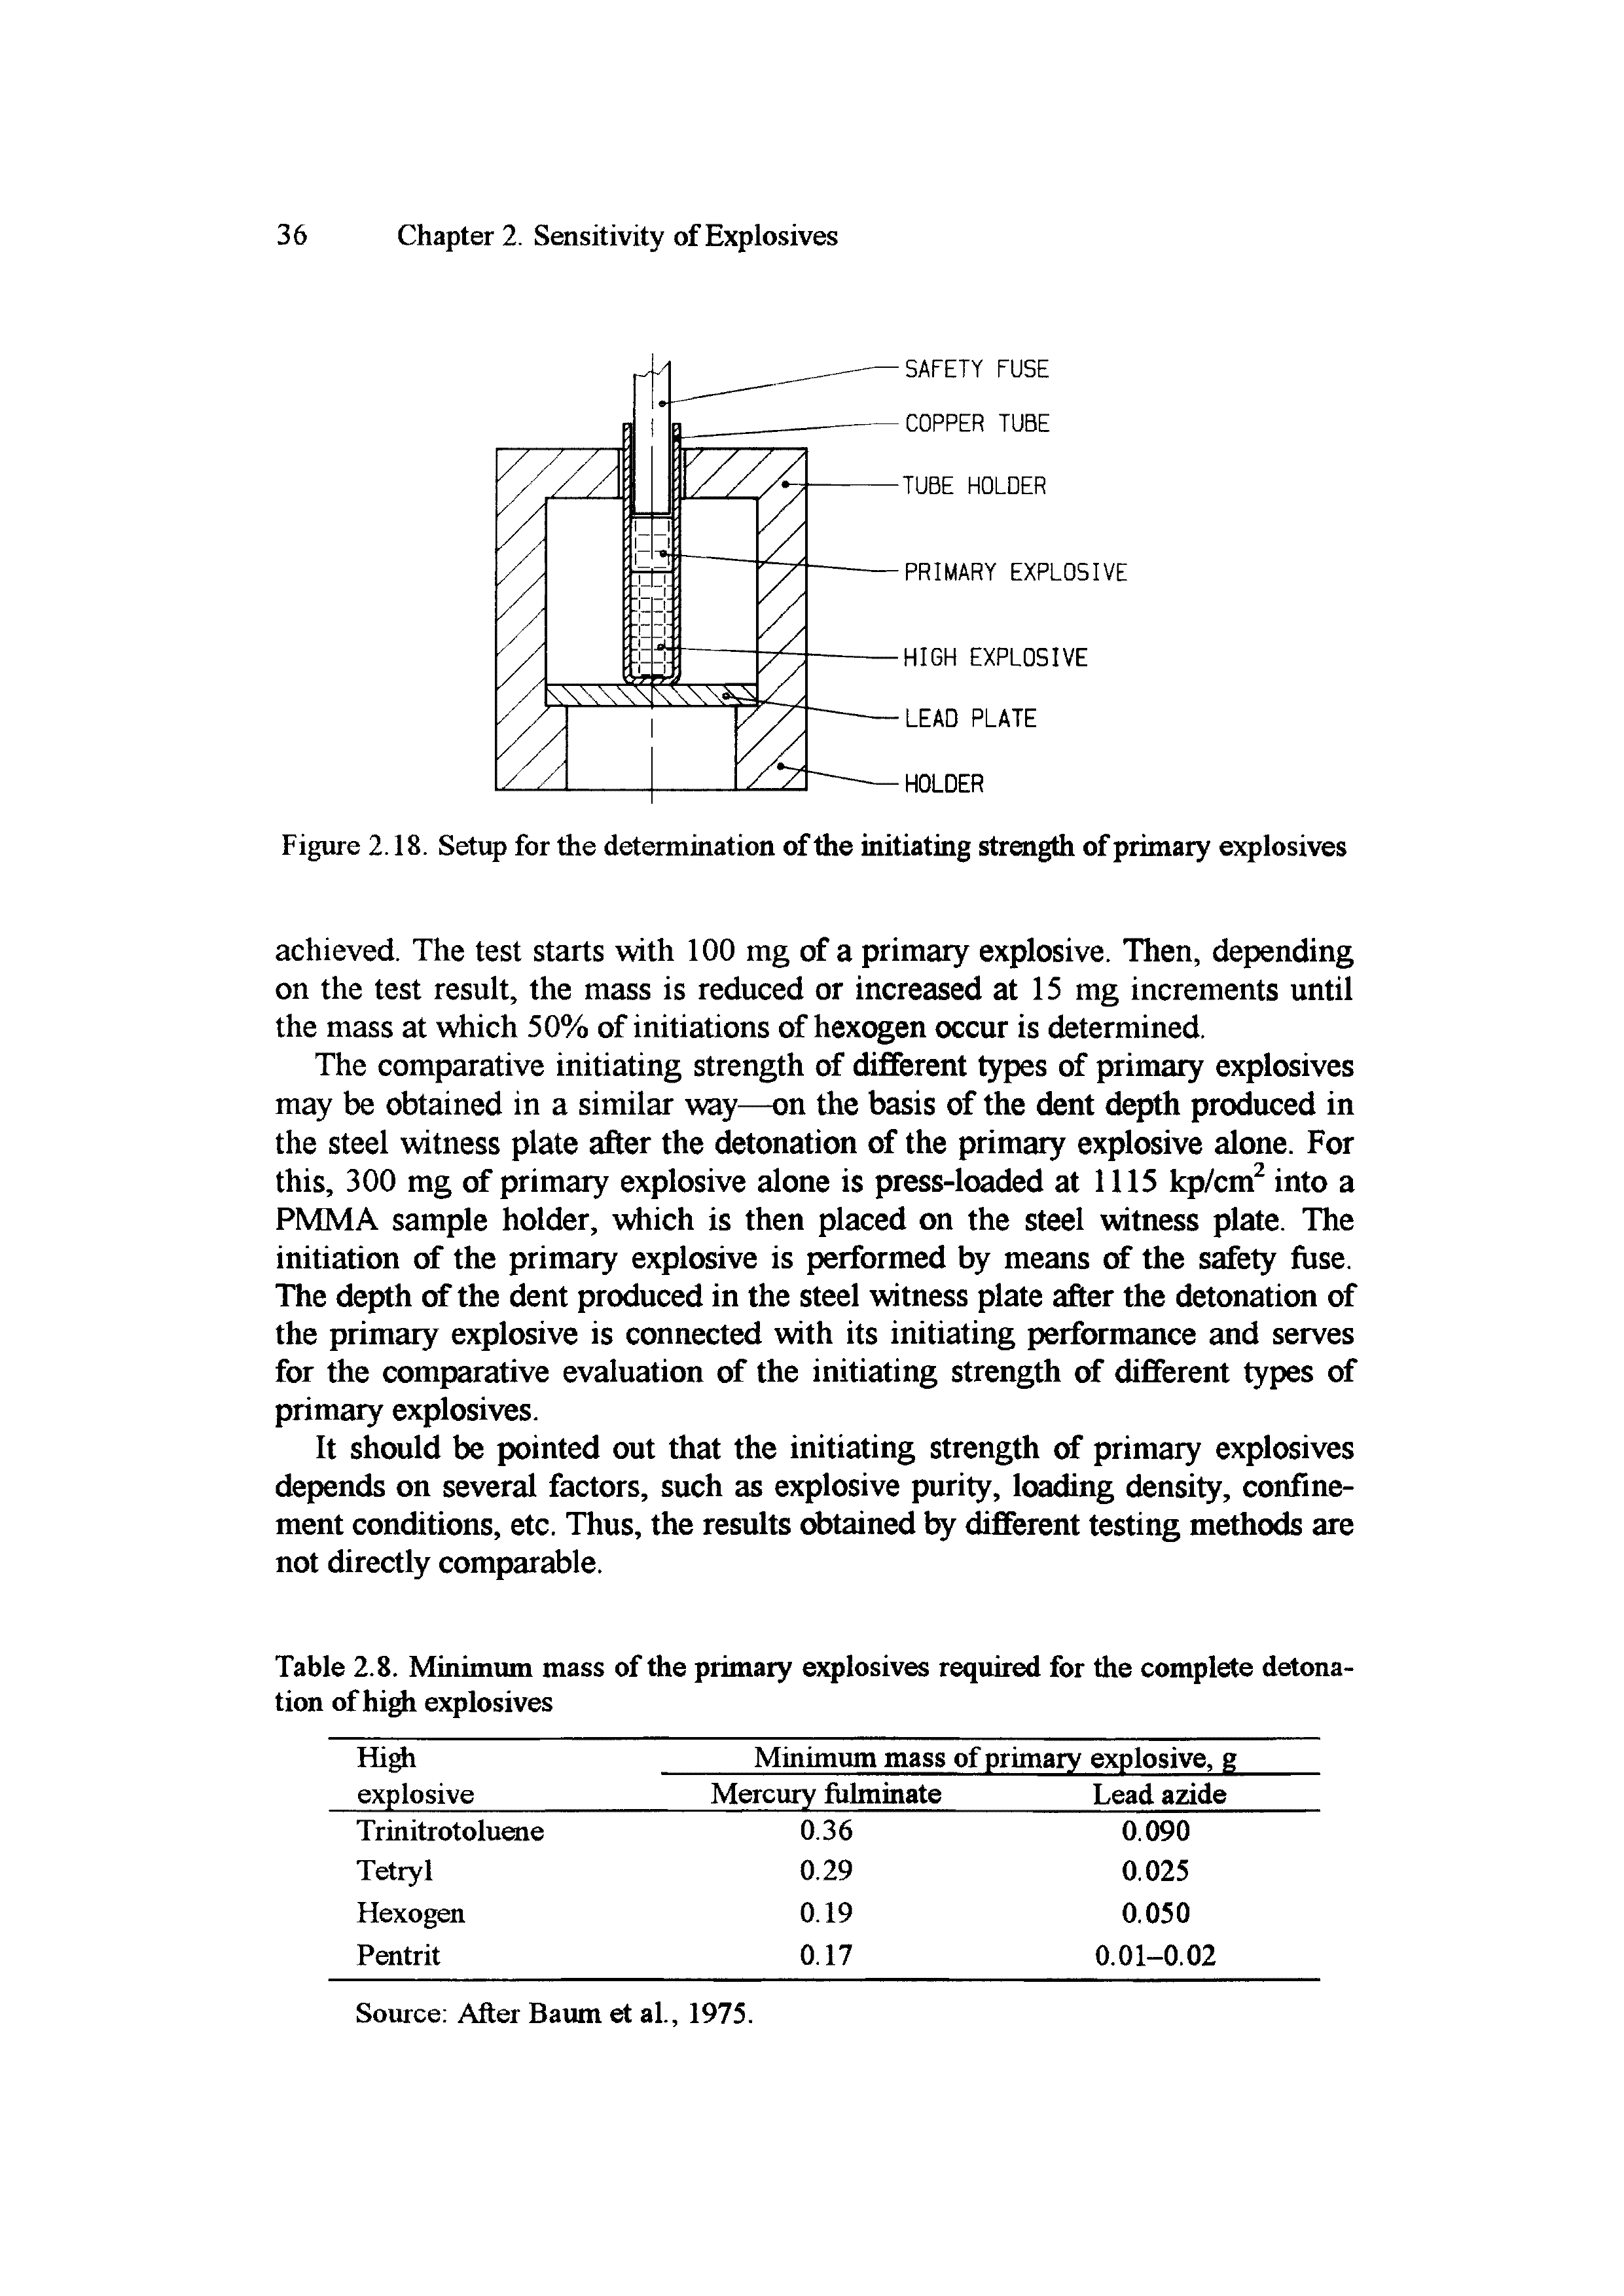 Figure 2.18. Setup for the determination of the initiating strength of primary explosives...